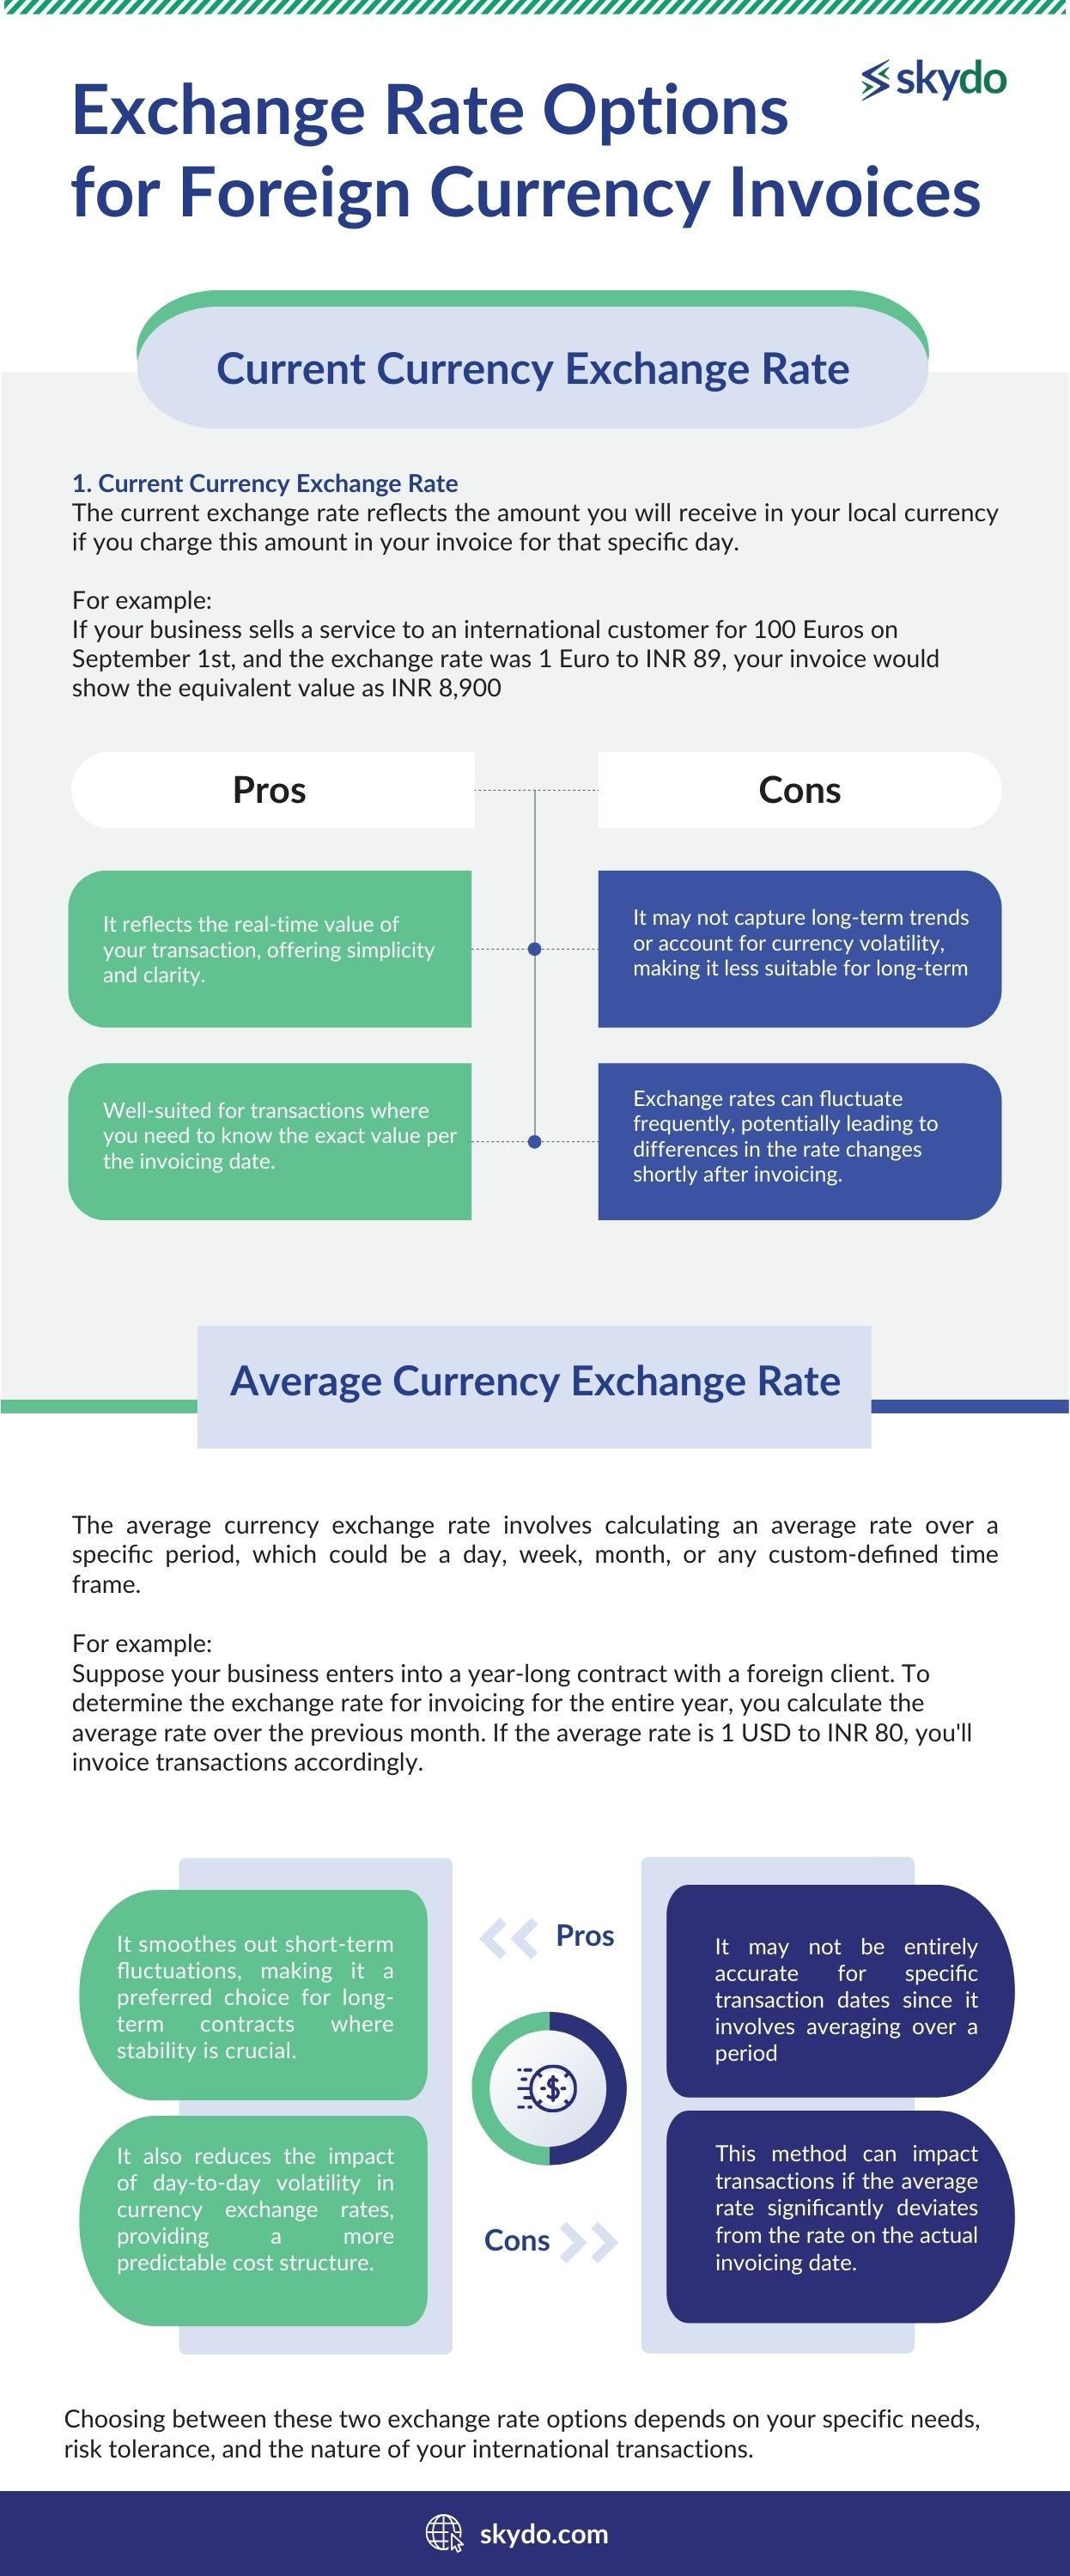 Exchange Rate Options for Foreign Currency Invoices